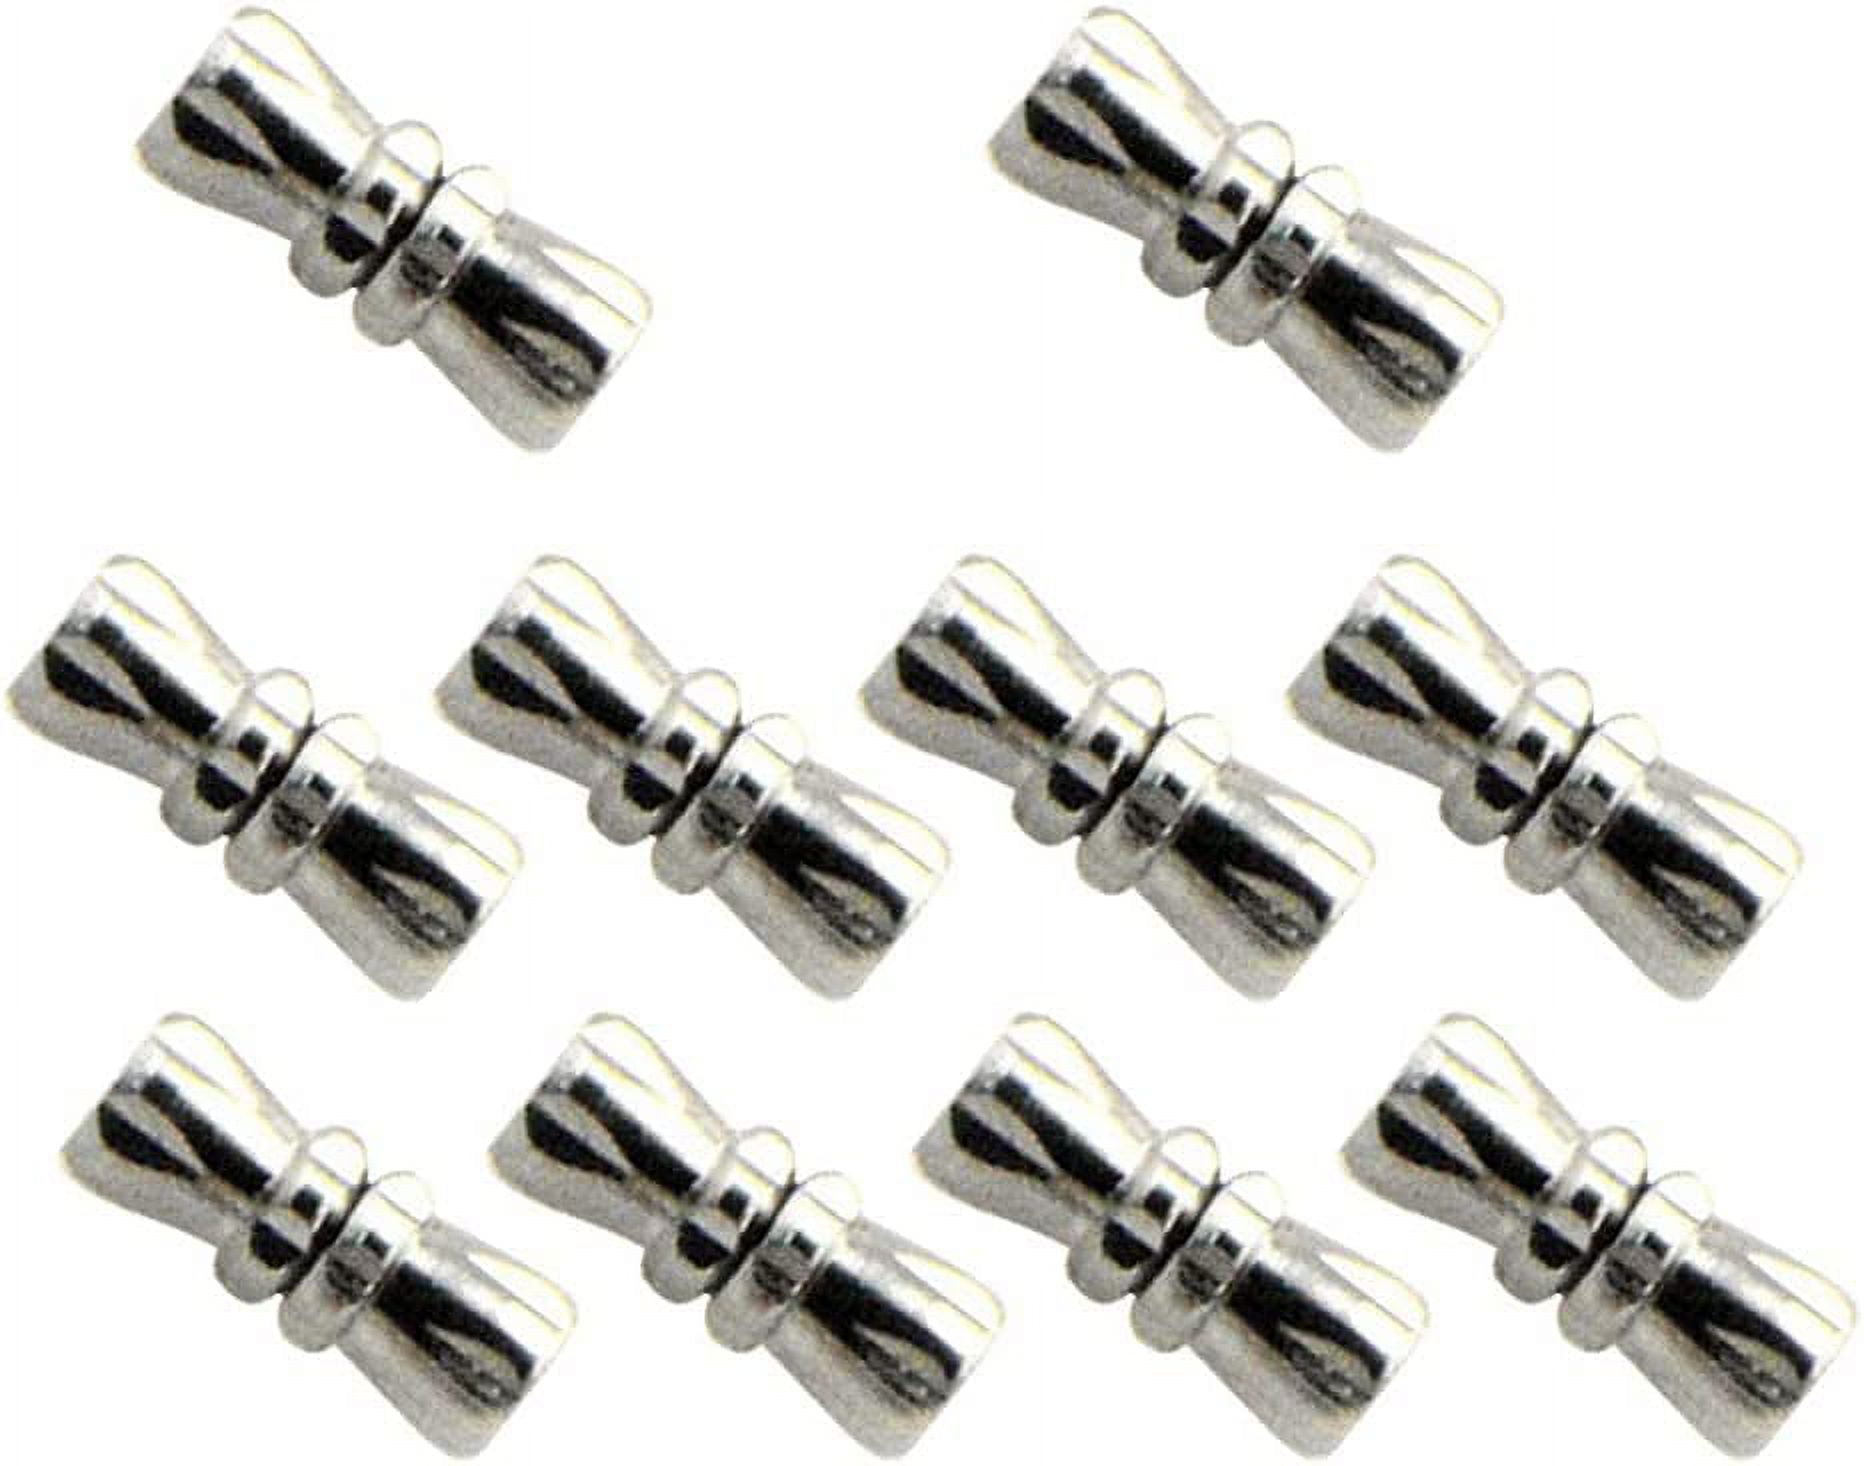 10Pcs Sterling Silver Pendant Clasp Earring Hooks 22mm Fish Hook Ear Wires  with Pinch Bails for Jewelry Making